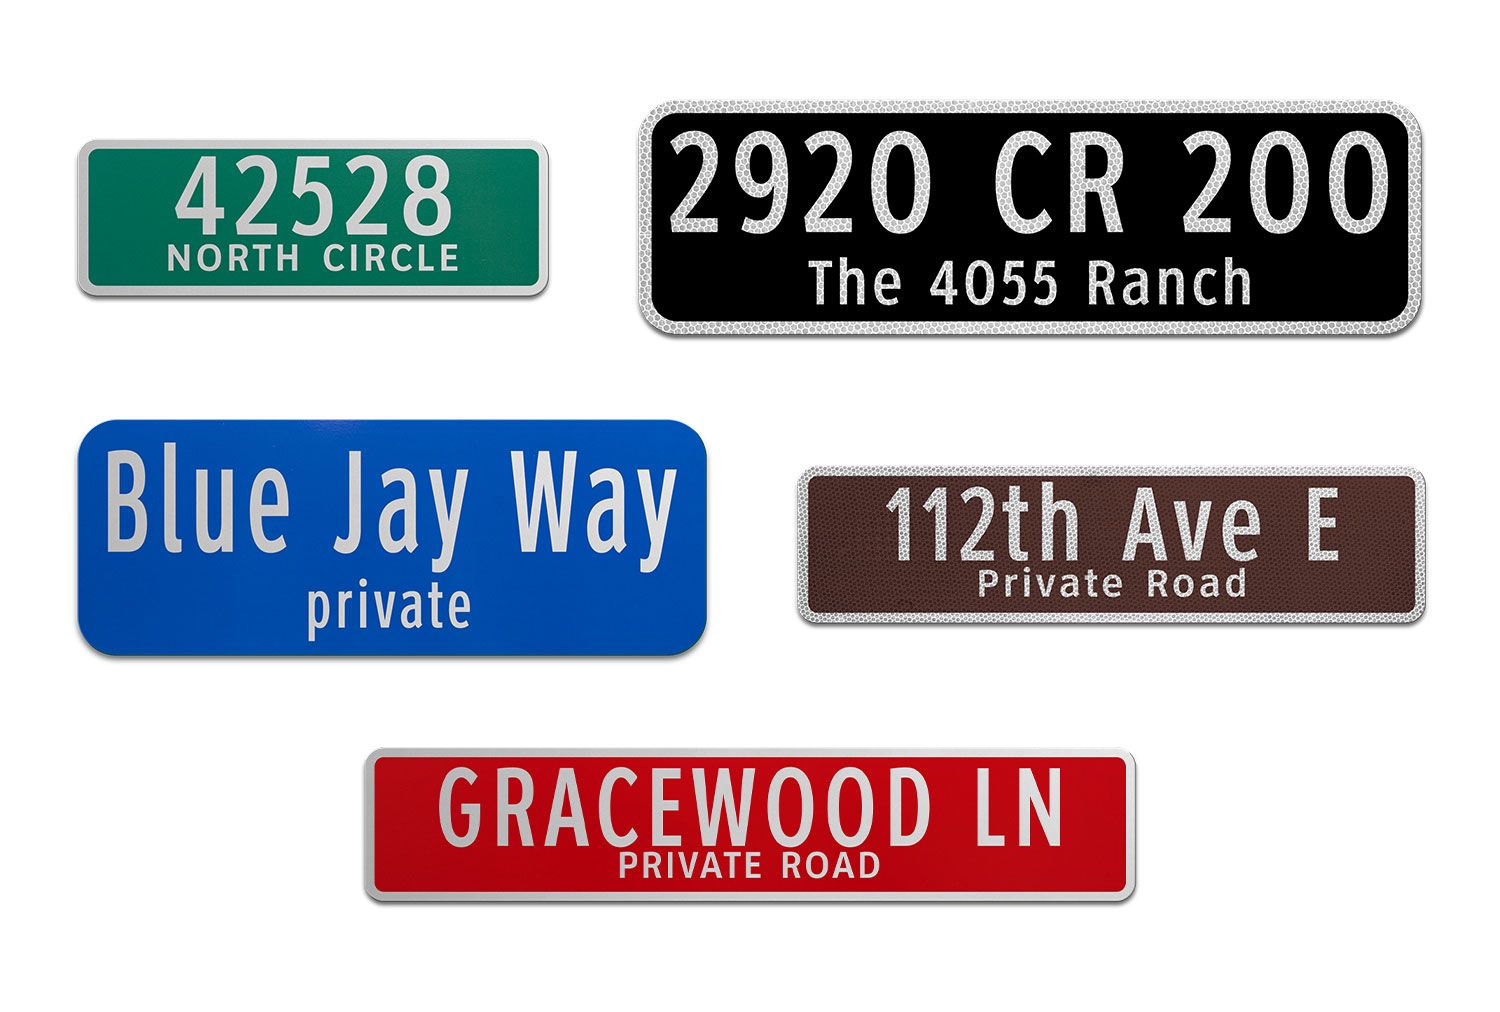 Samples of Printed Flat Blade Signs with Images and Street Numbers